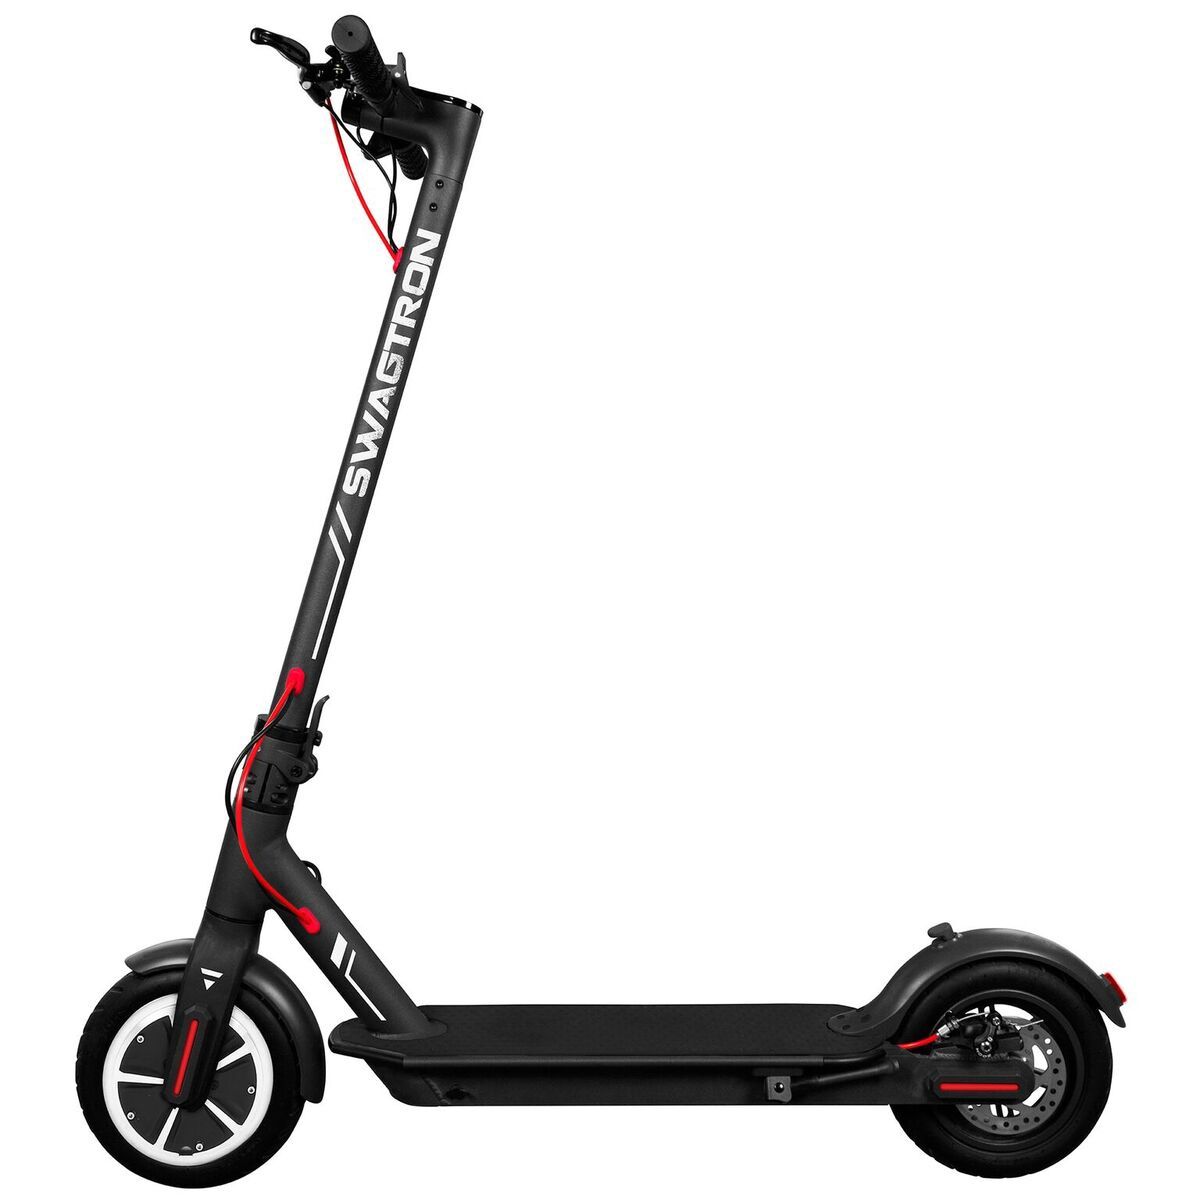 TODAY ONLY - $200 - SWAGGER 5 ELITE ELECTRIC SMART SCOOTER - BRAND NEW